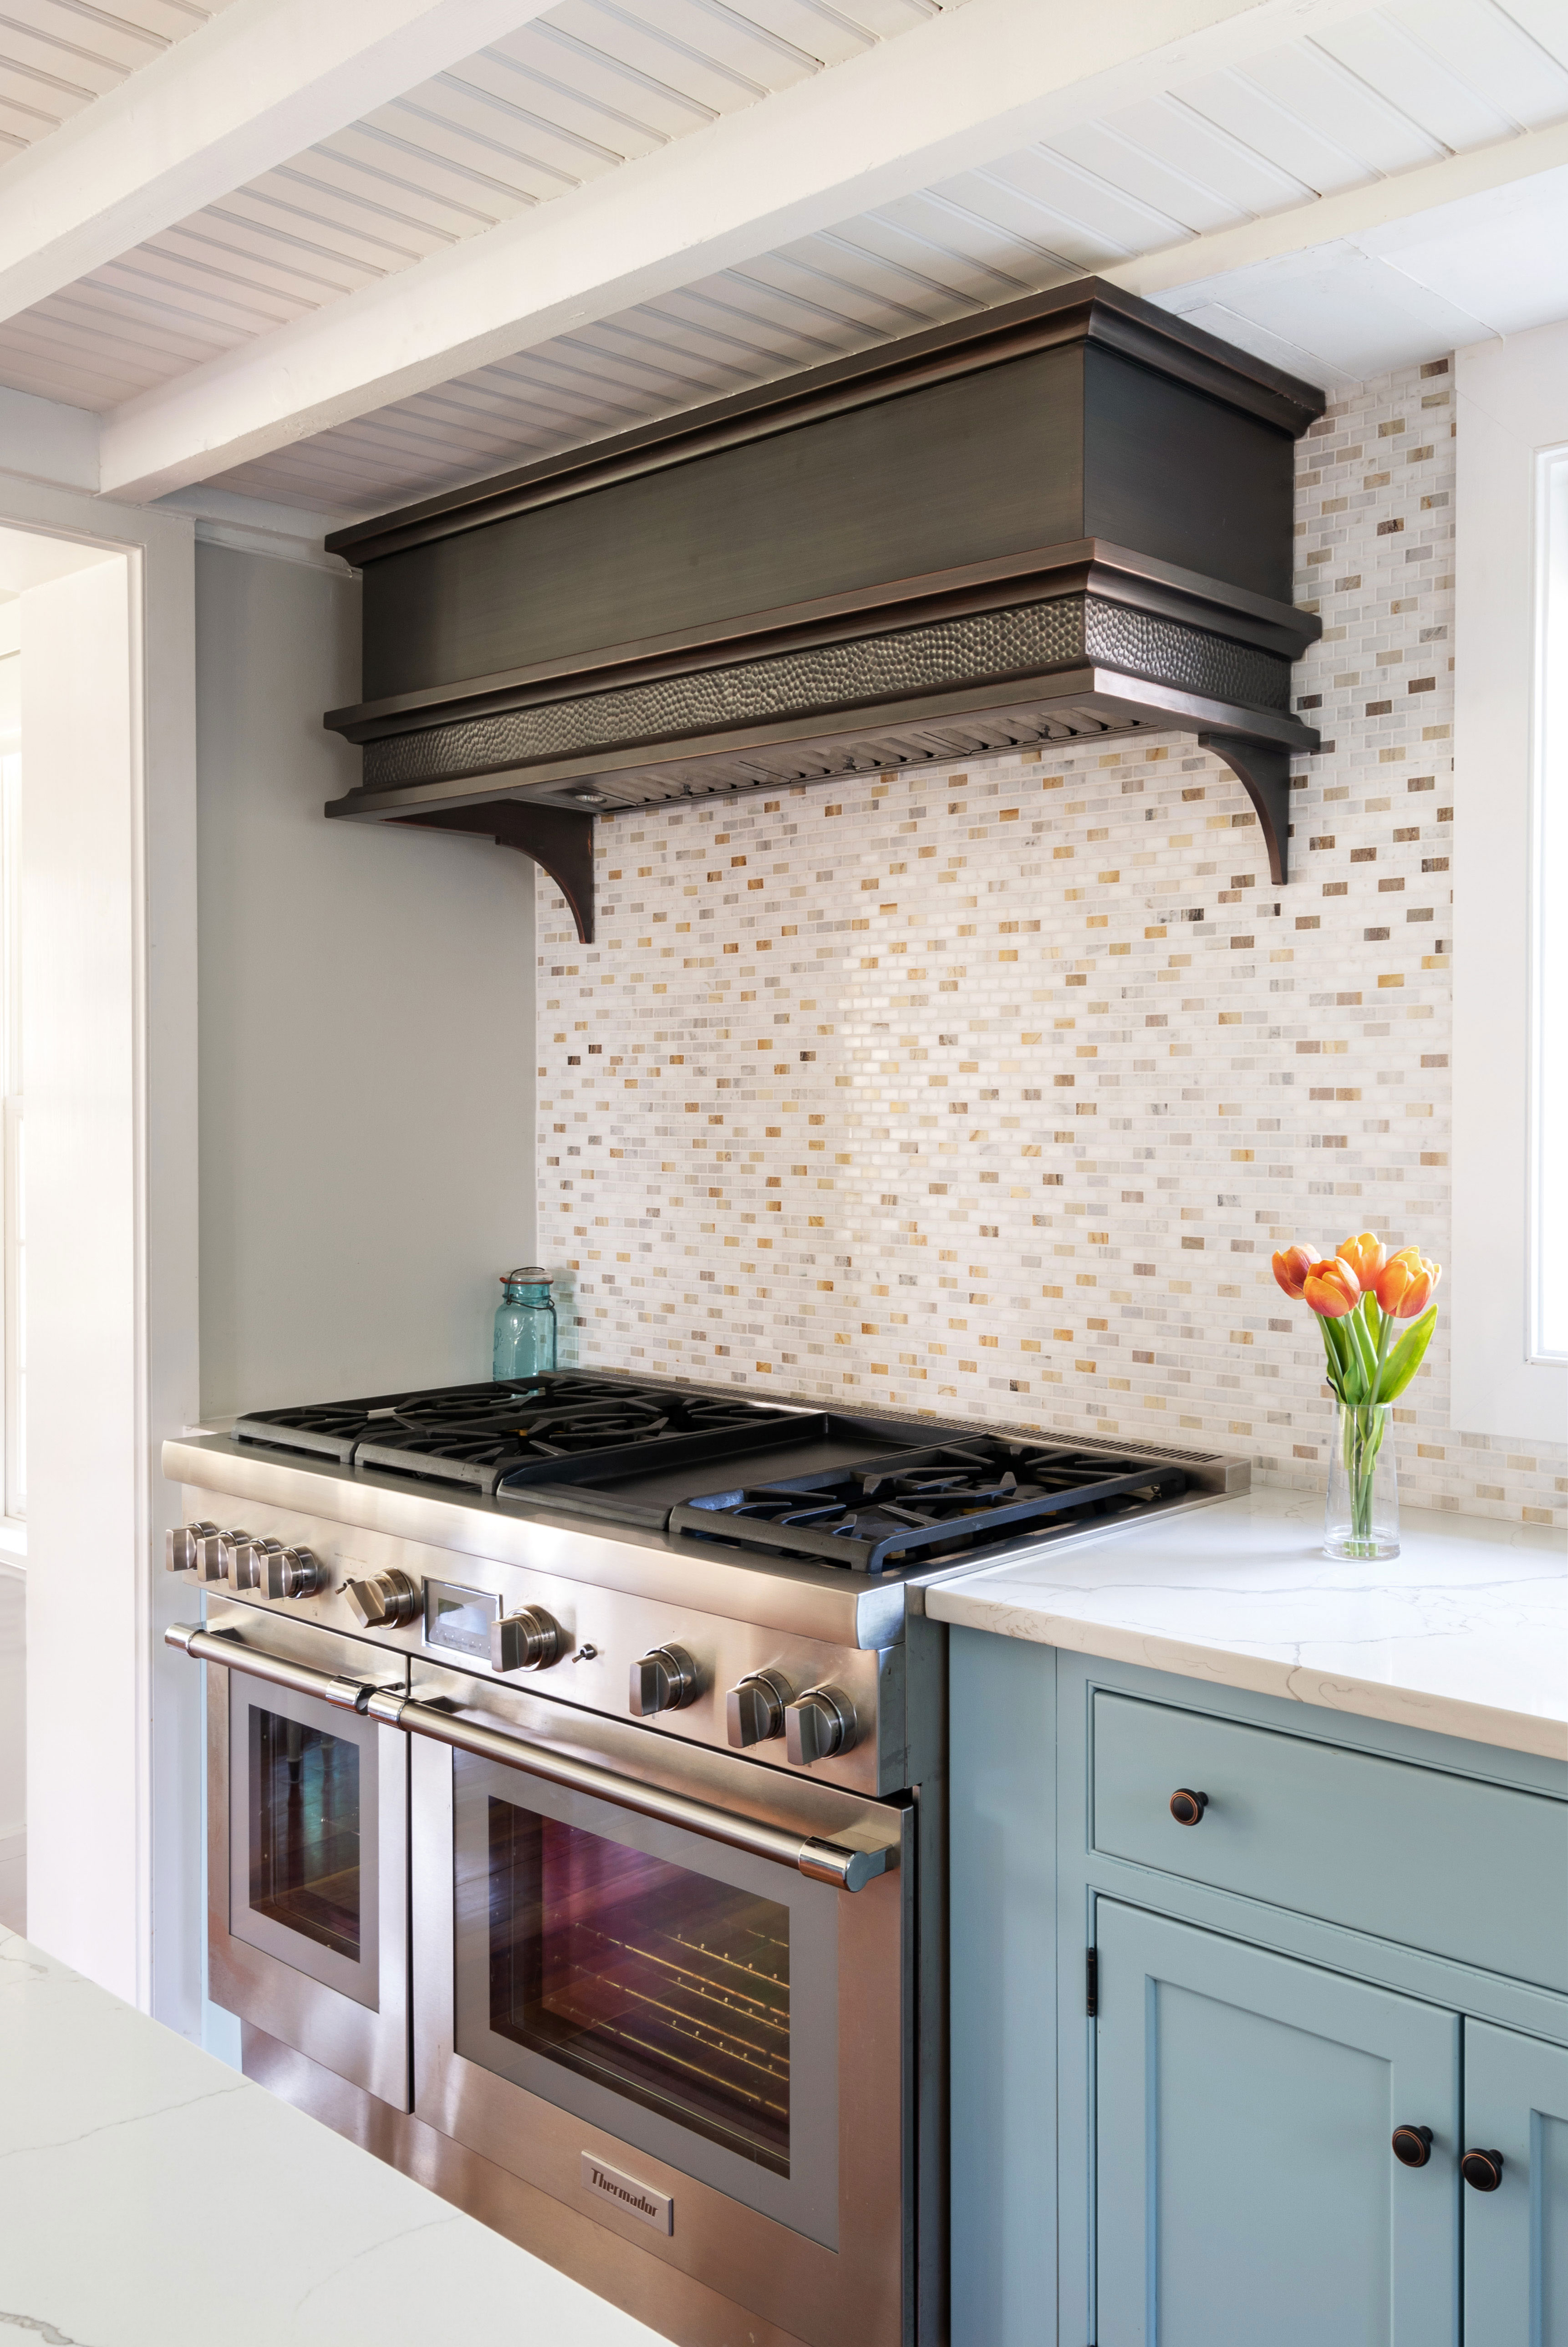 A beautiful traditional kitchen complemented by stylish range hood with wood kitchen cabinets, marble kitchen countertops and brick backsplash